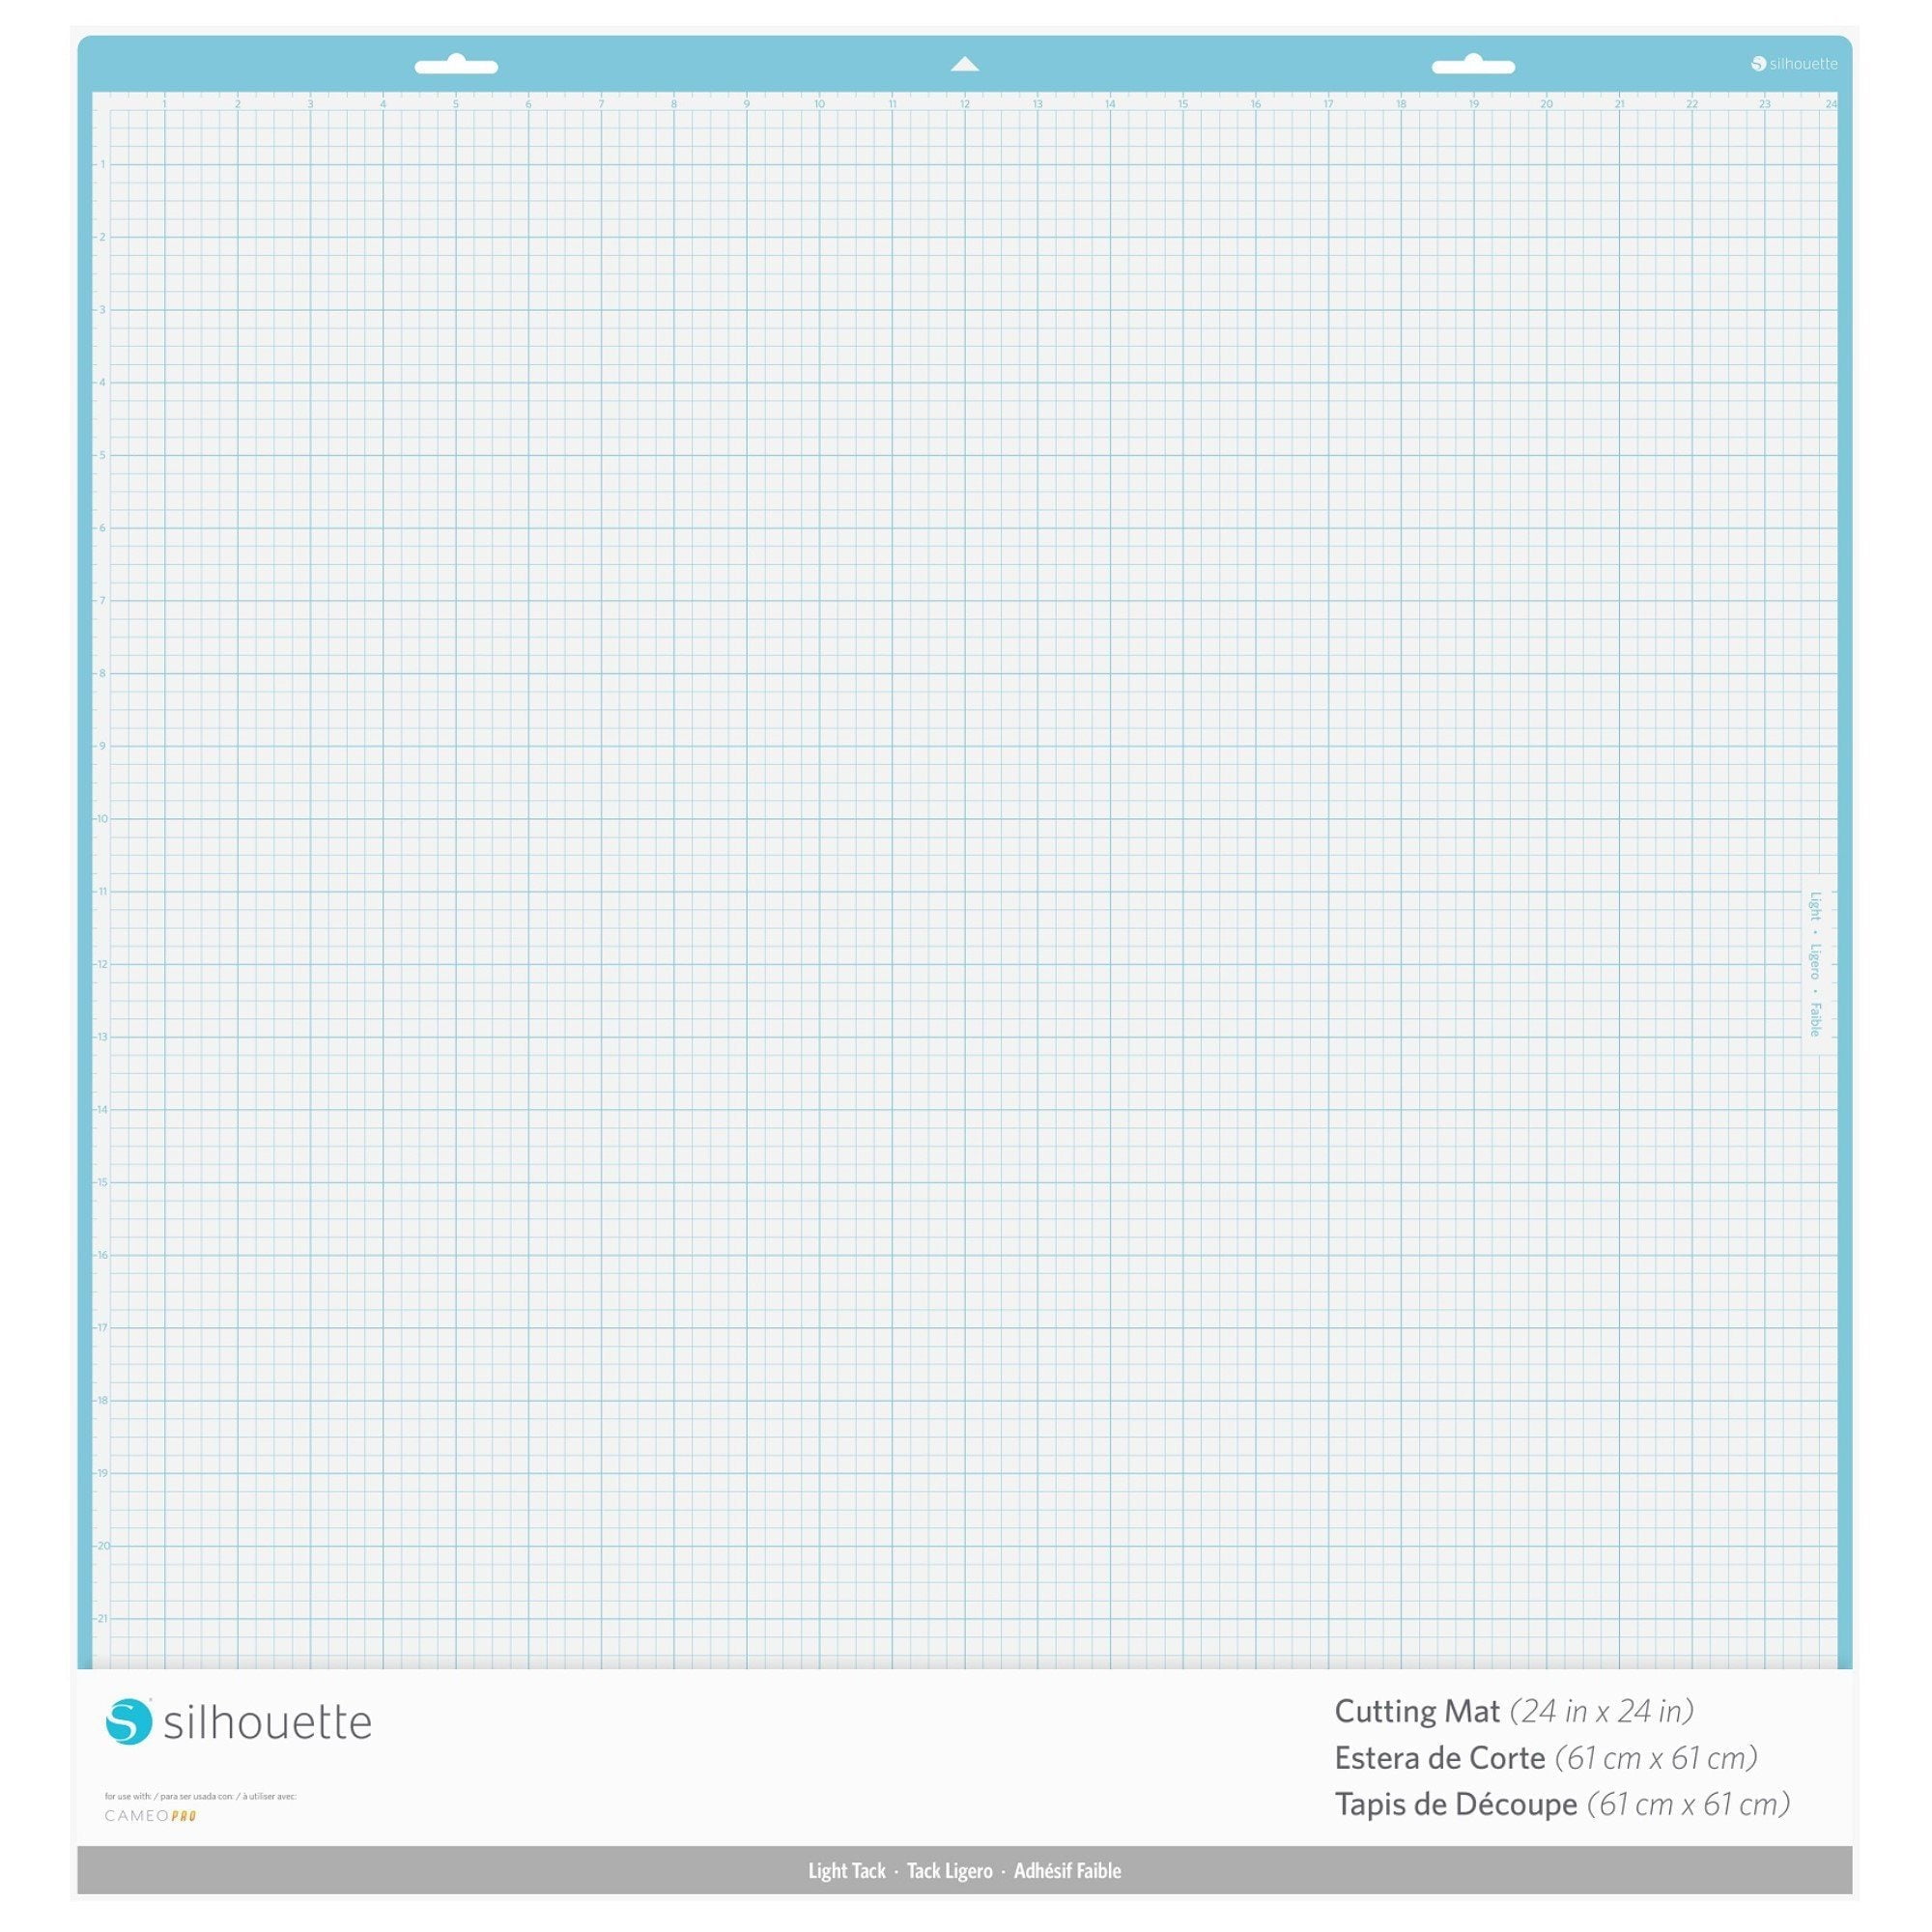 Silhouette Cameo Large Cutting Mat - 12 x 24